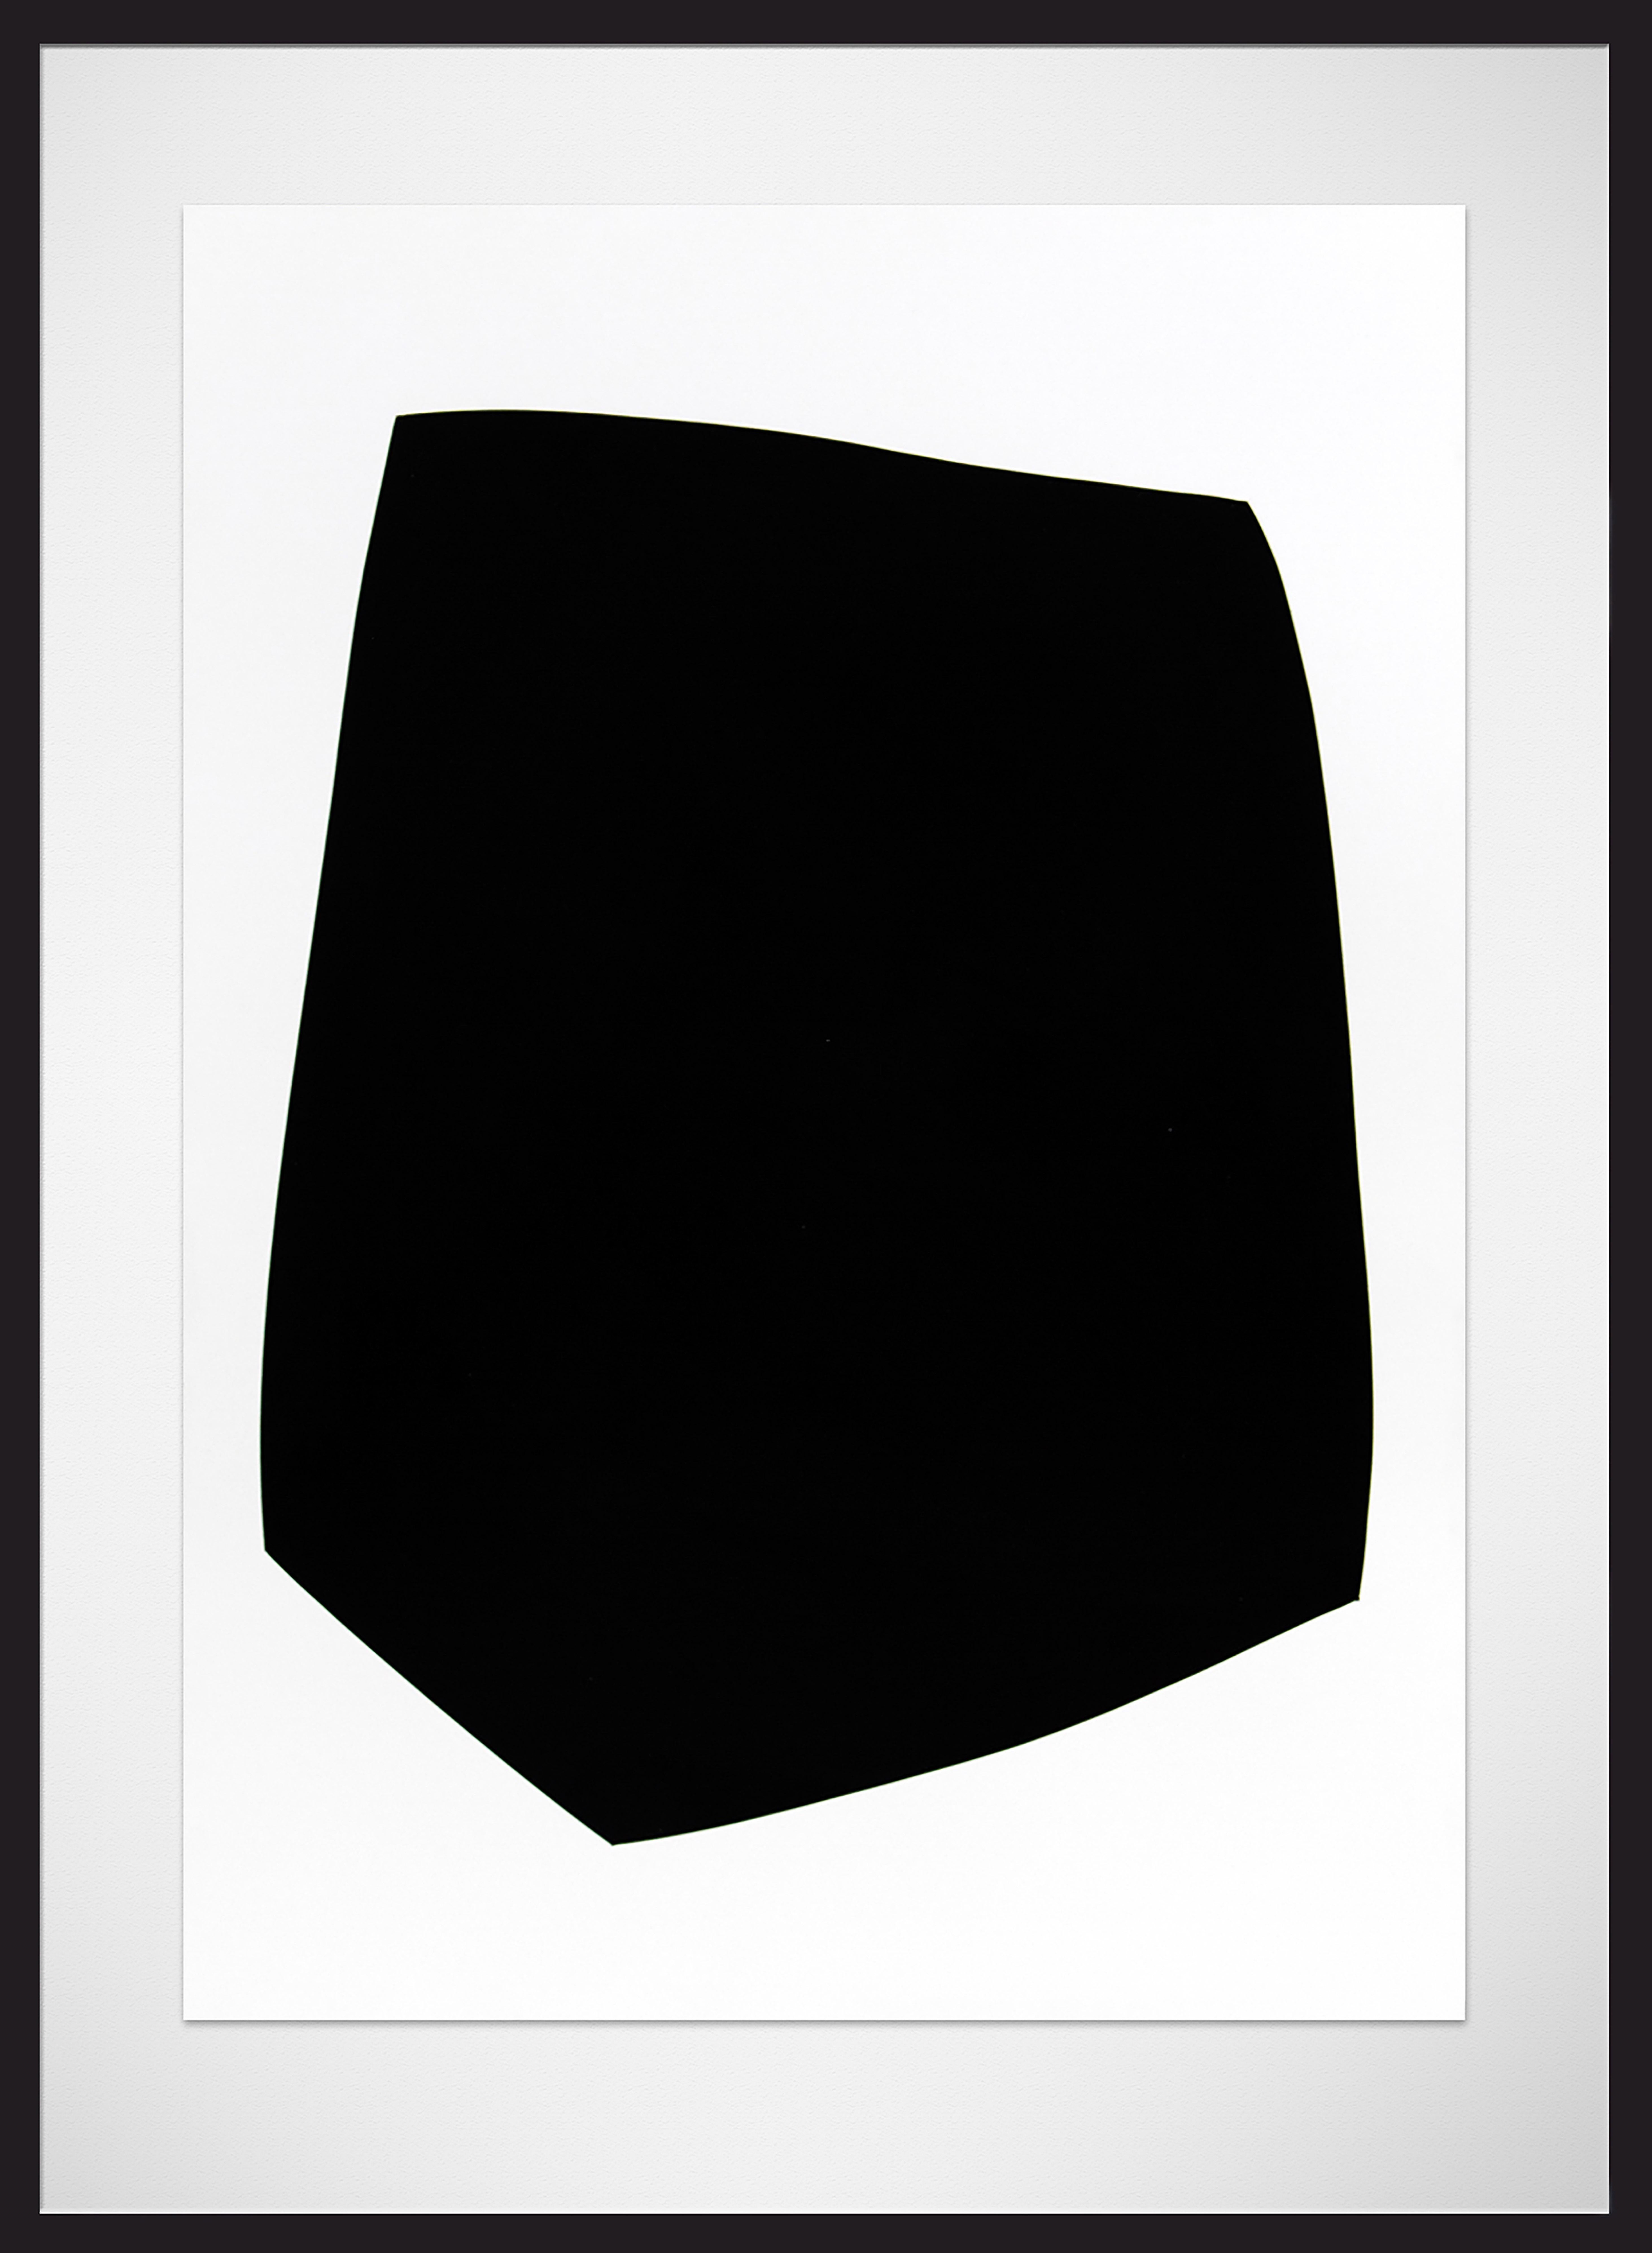 Single Black Shape - minimalist, contemporary, abstract, gesso on archival paper - Painting by Aron Hill